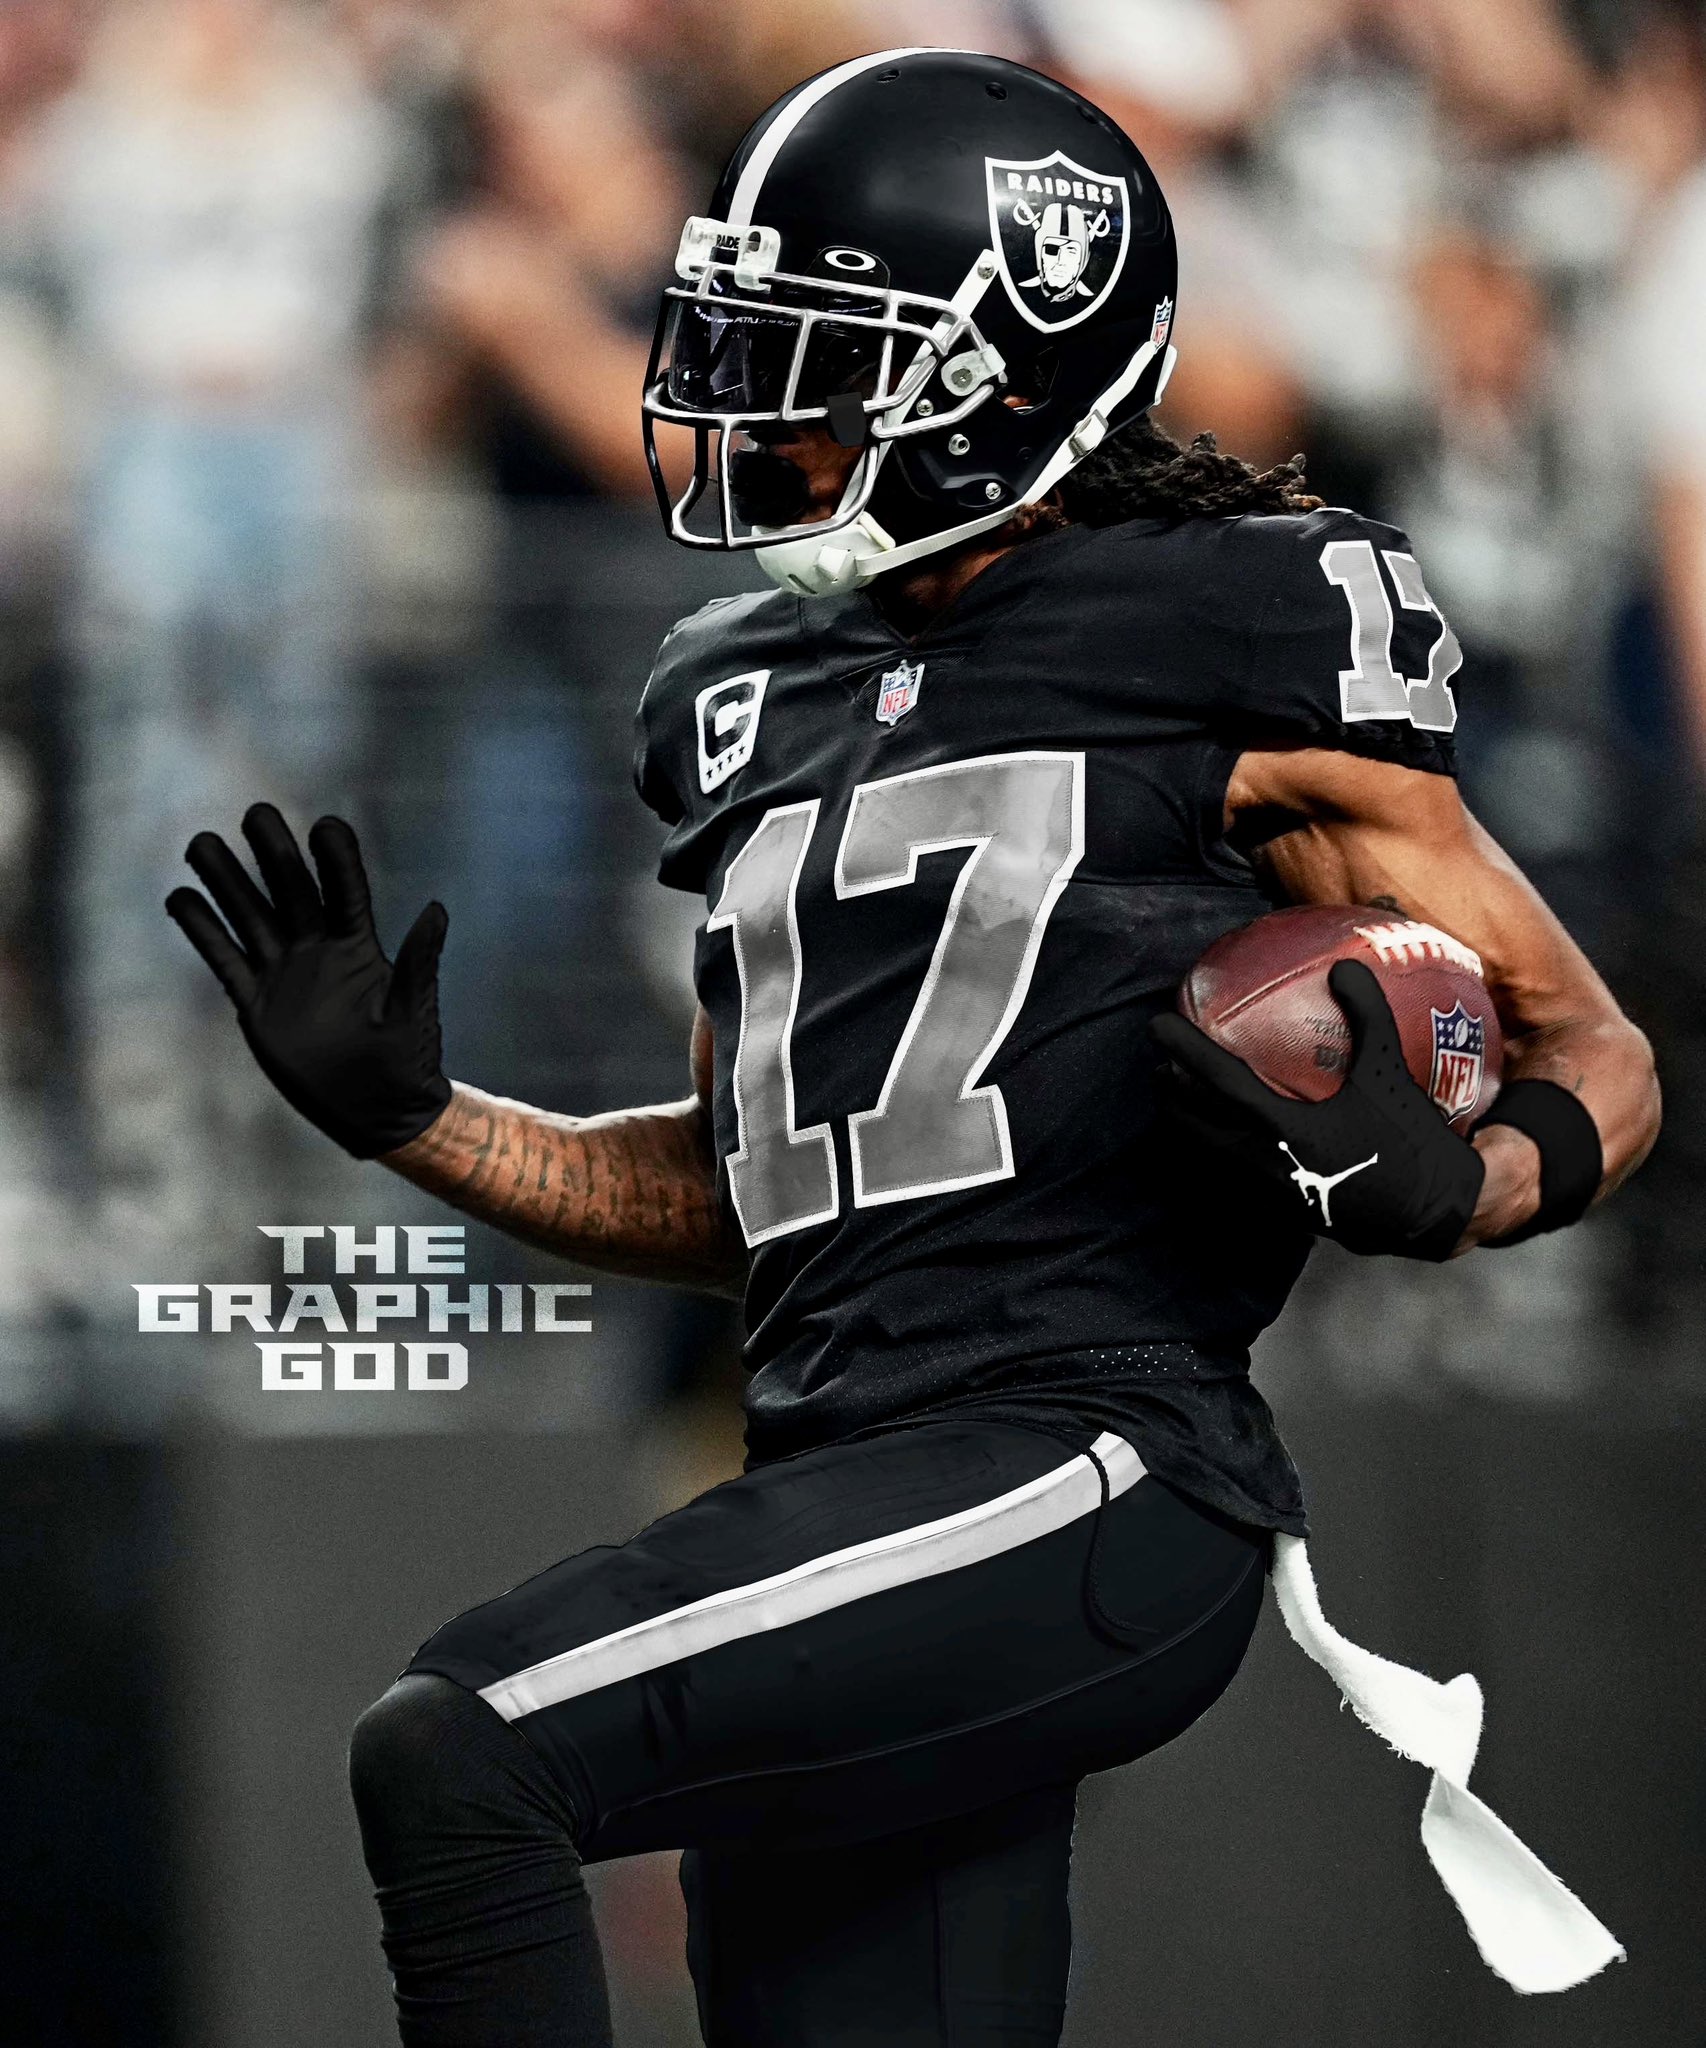 The Graphic God on X: 'Should the #Raiders introduce a “Black Hole